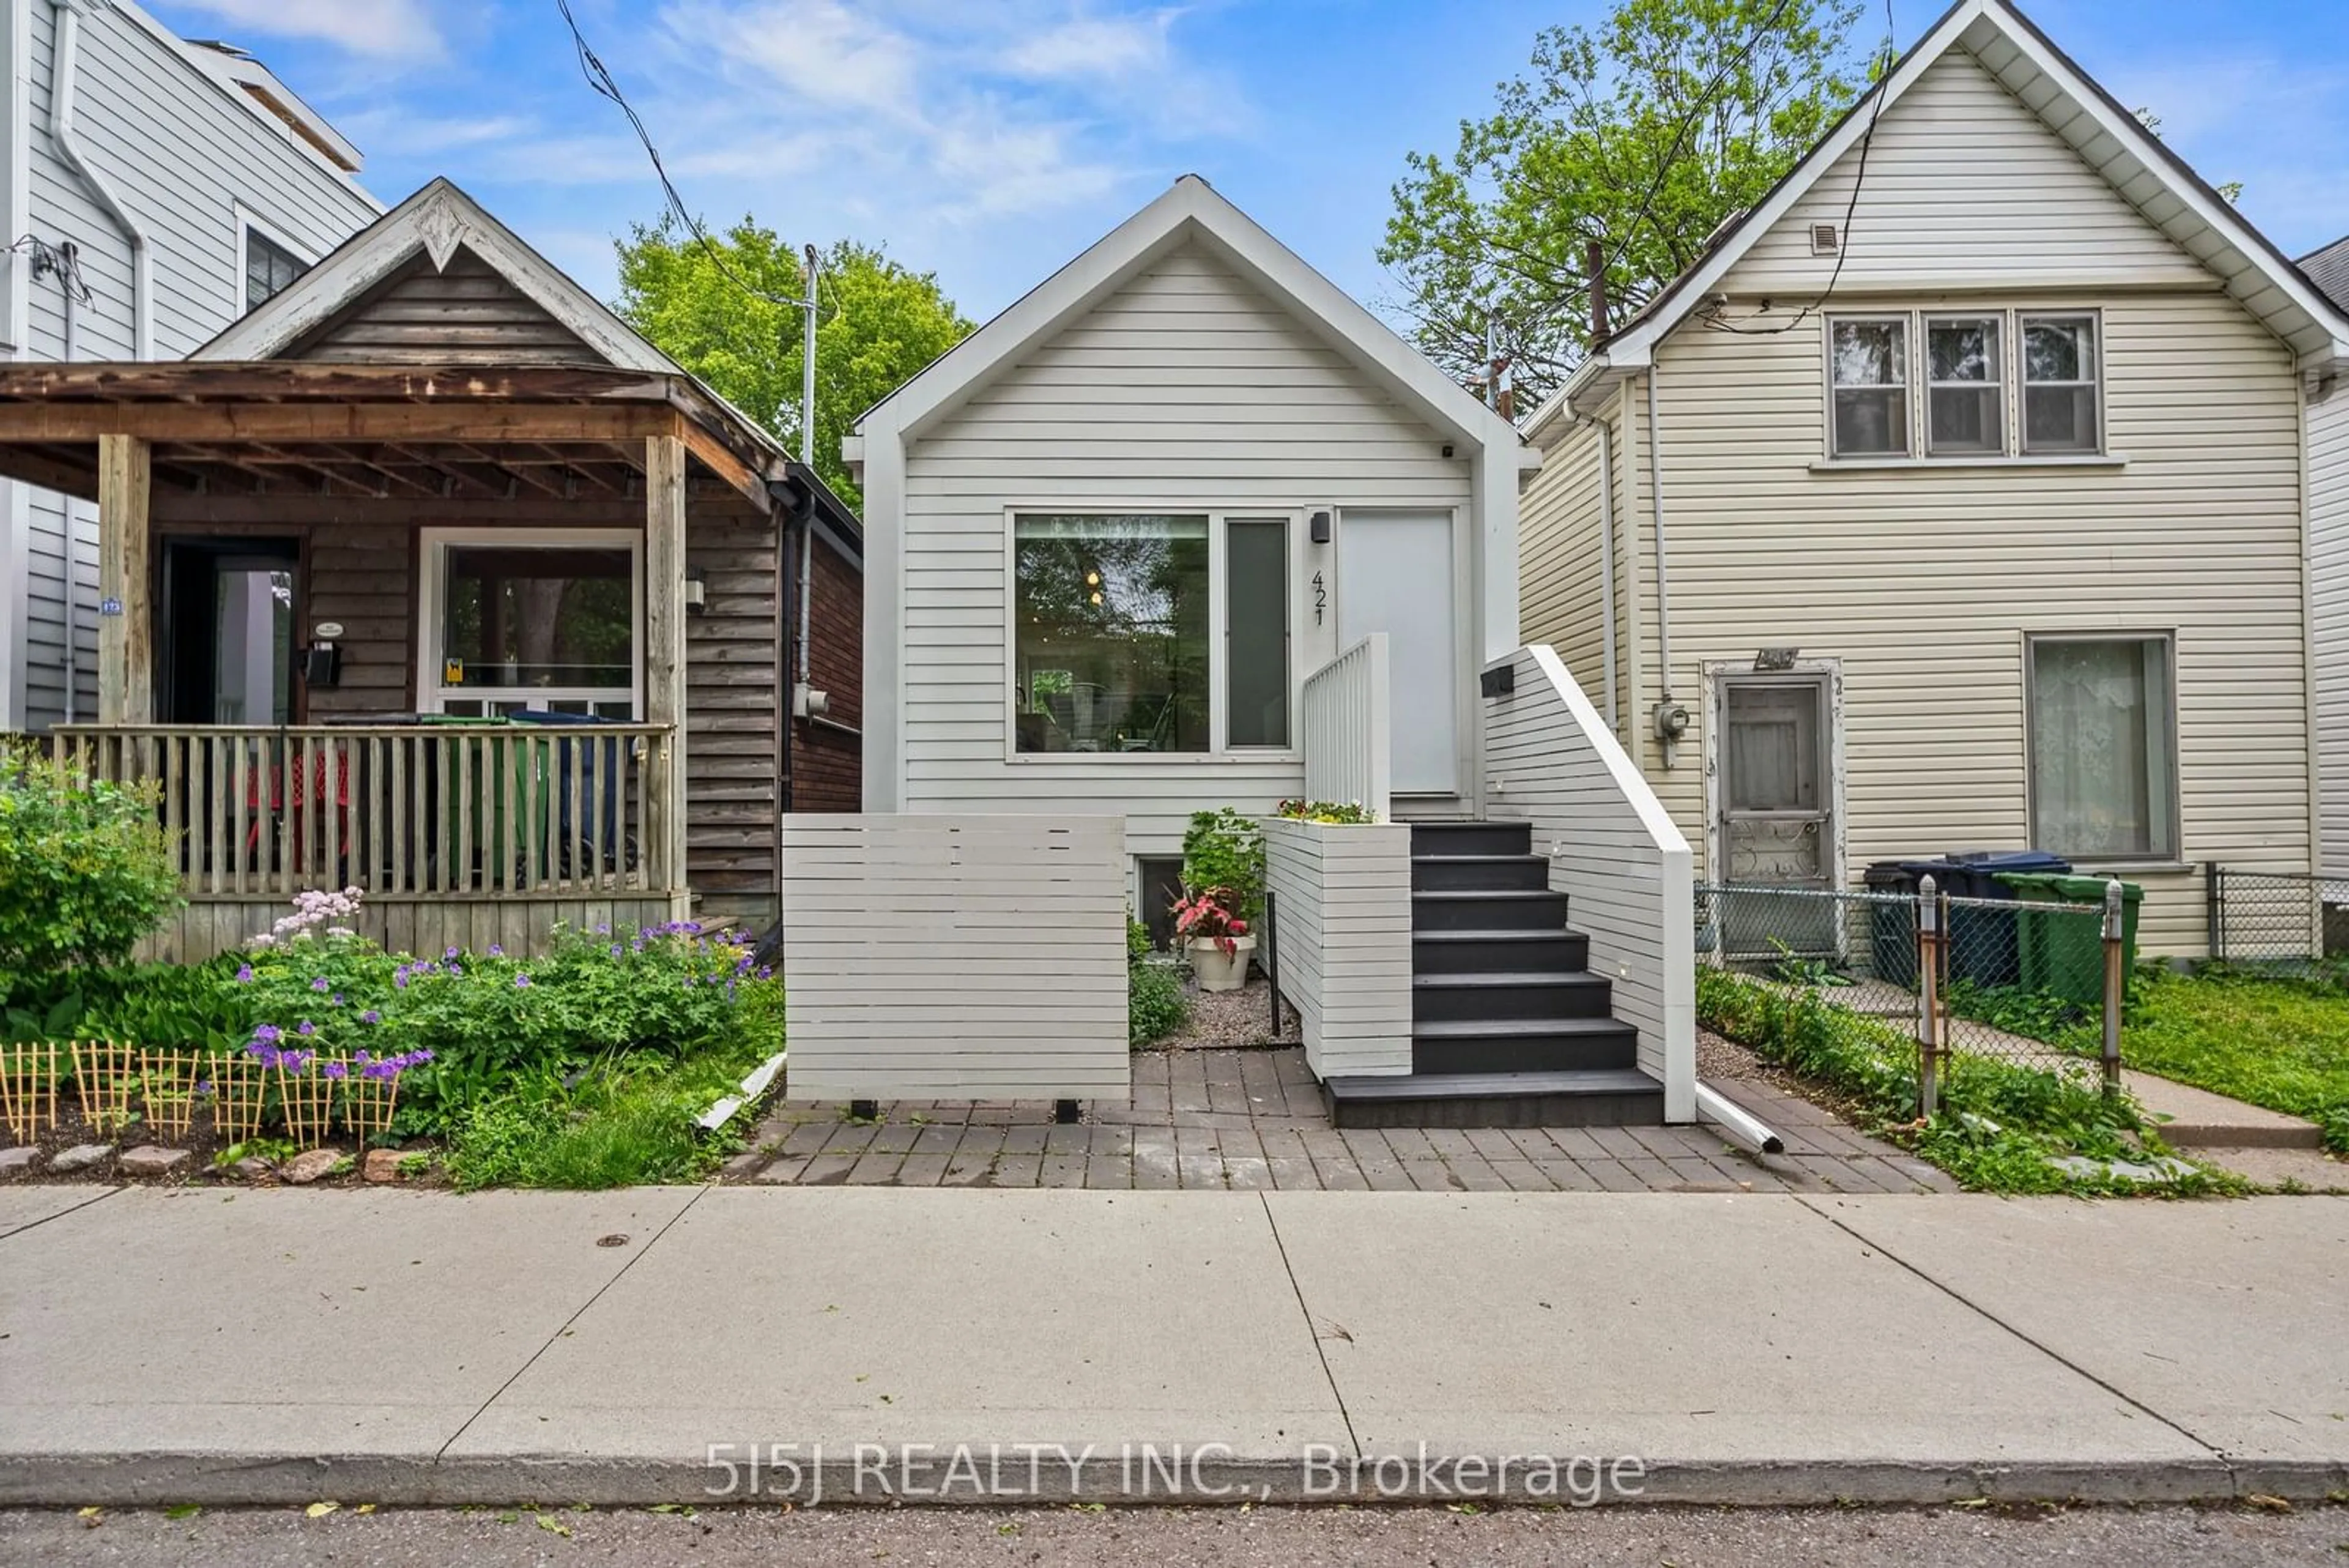 Frontside or backside of a home for 421 Craven Rd, Toronto Ontario M4L 2Z5